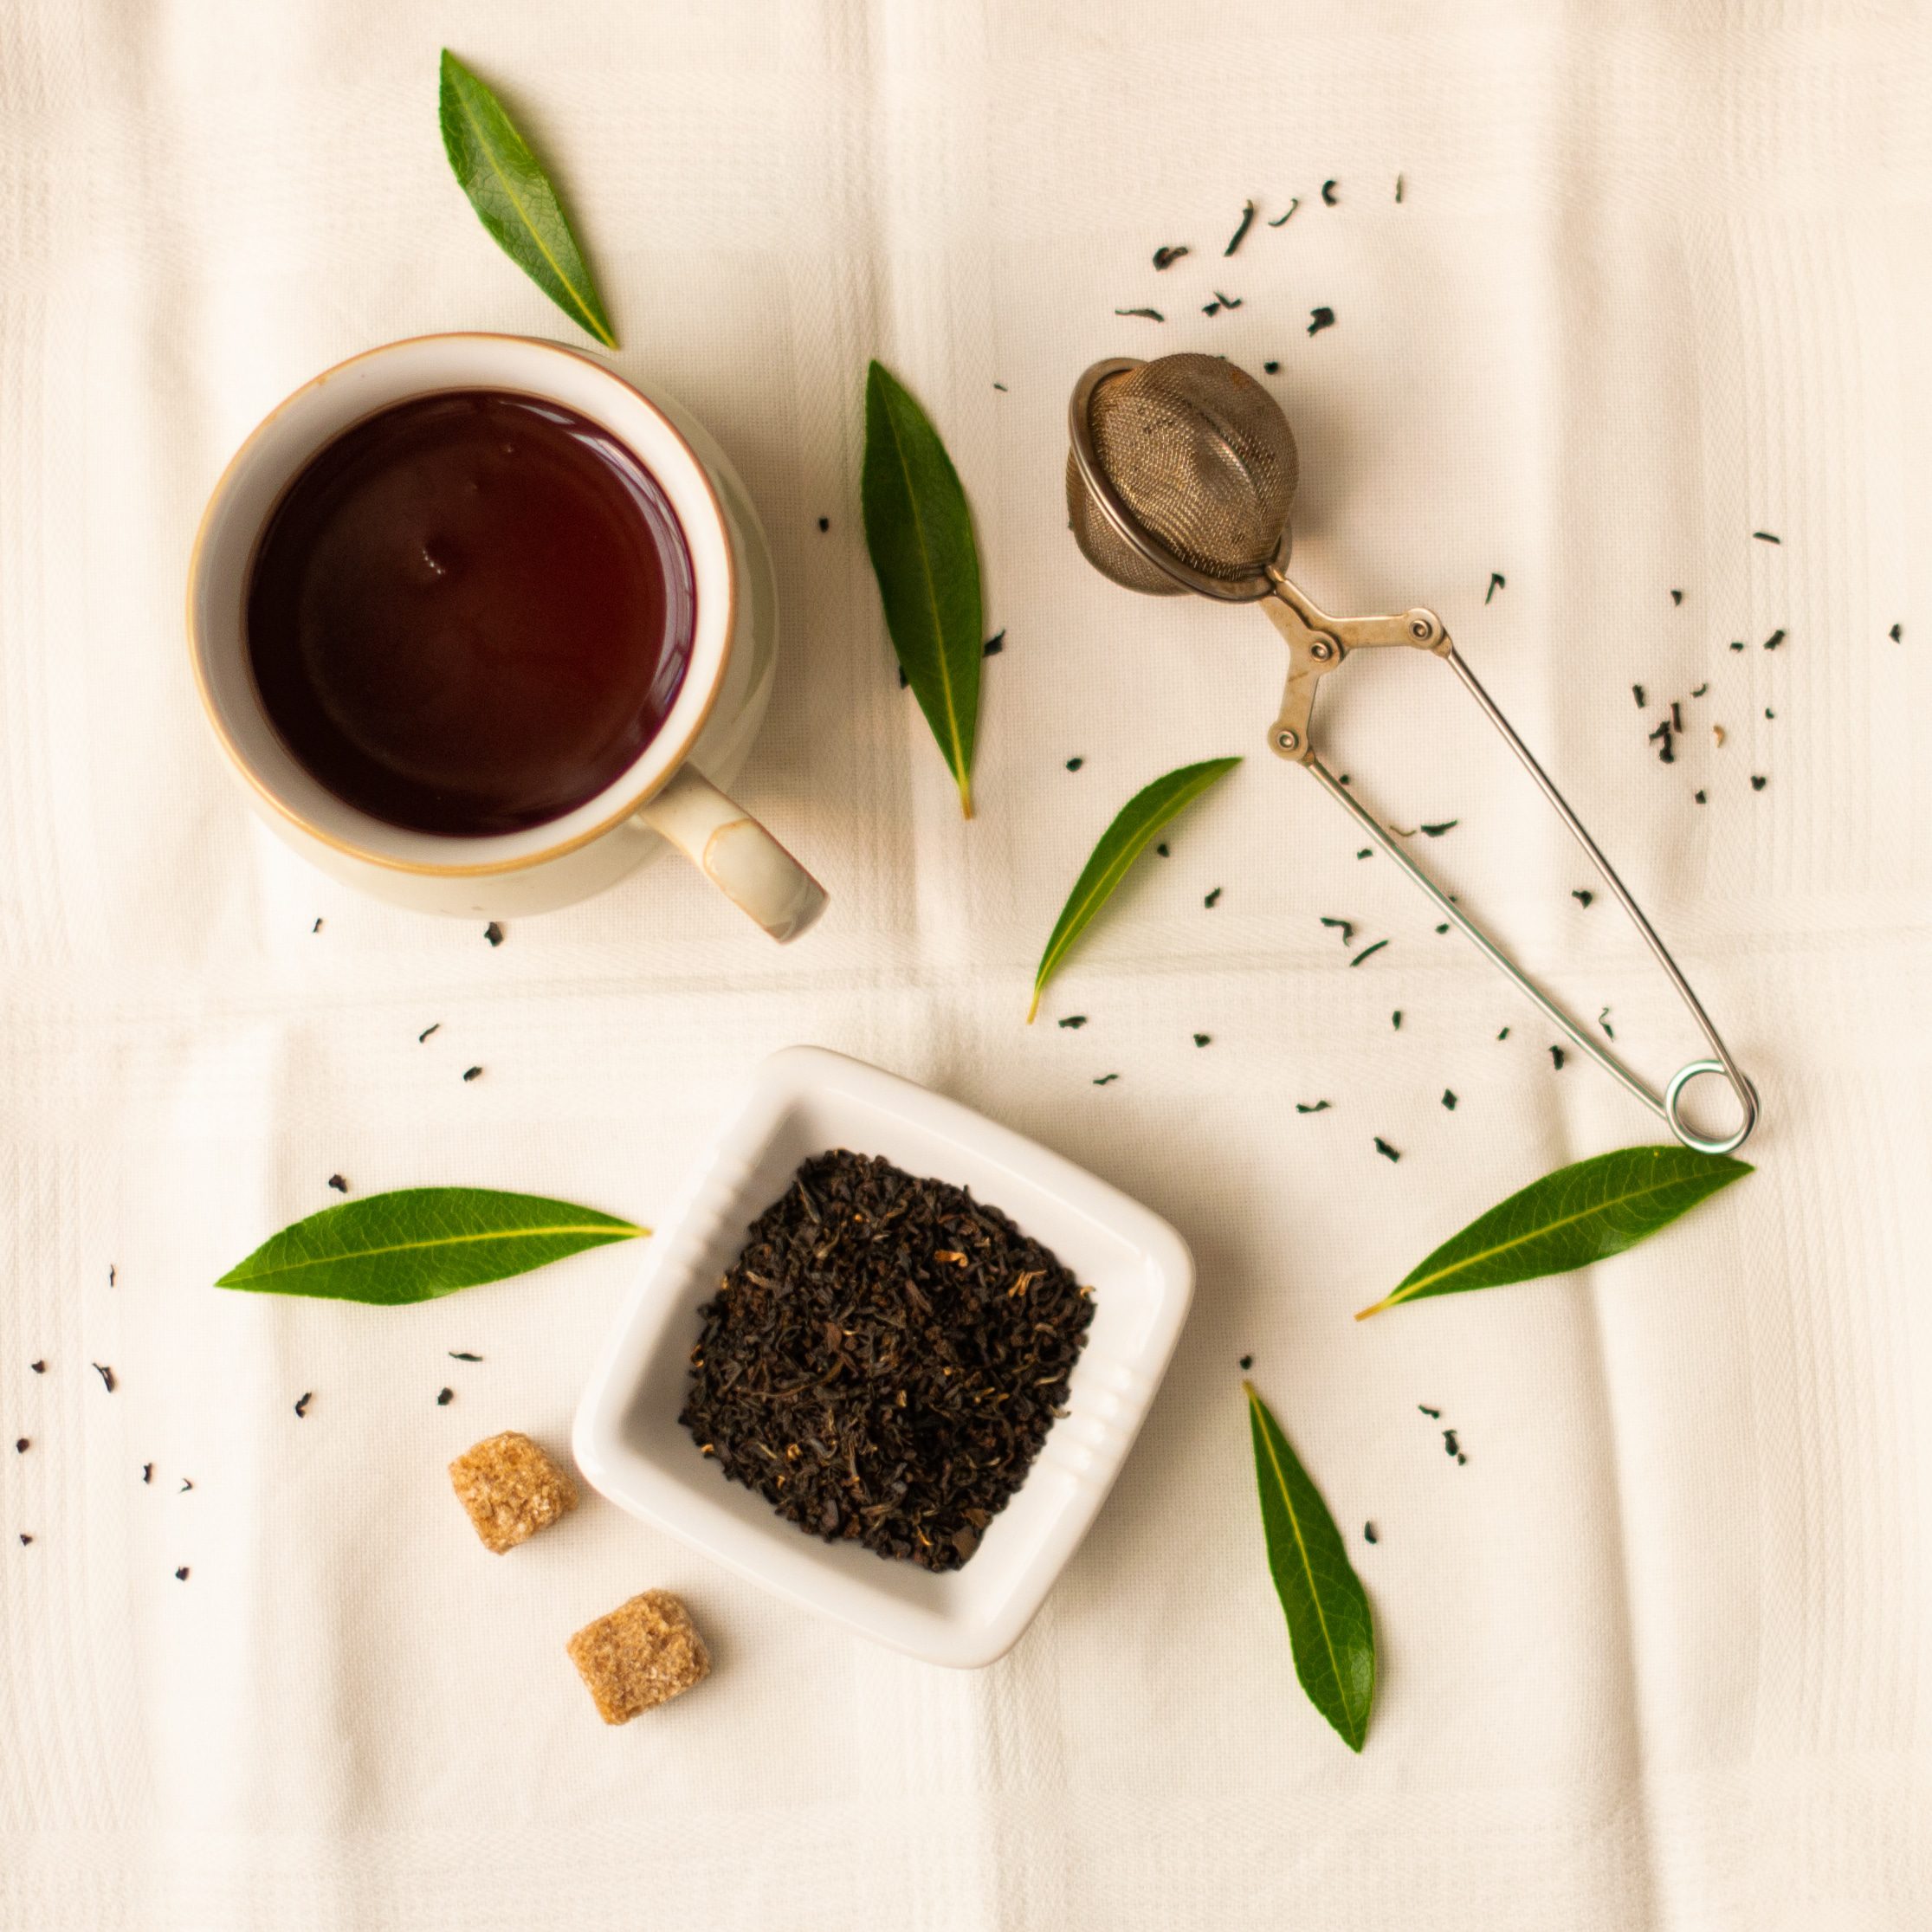 Cup of tea from above with green leaves, square dish of loose leaf tea and infuser 